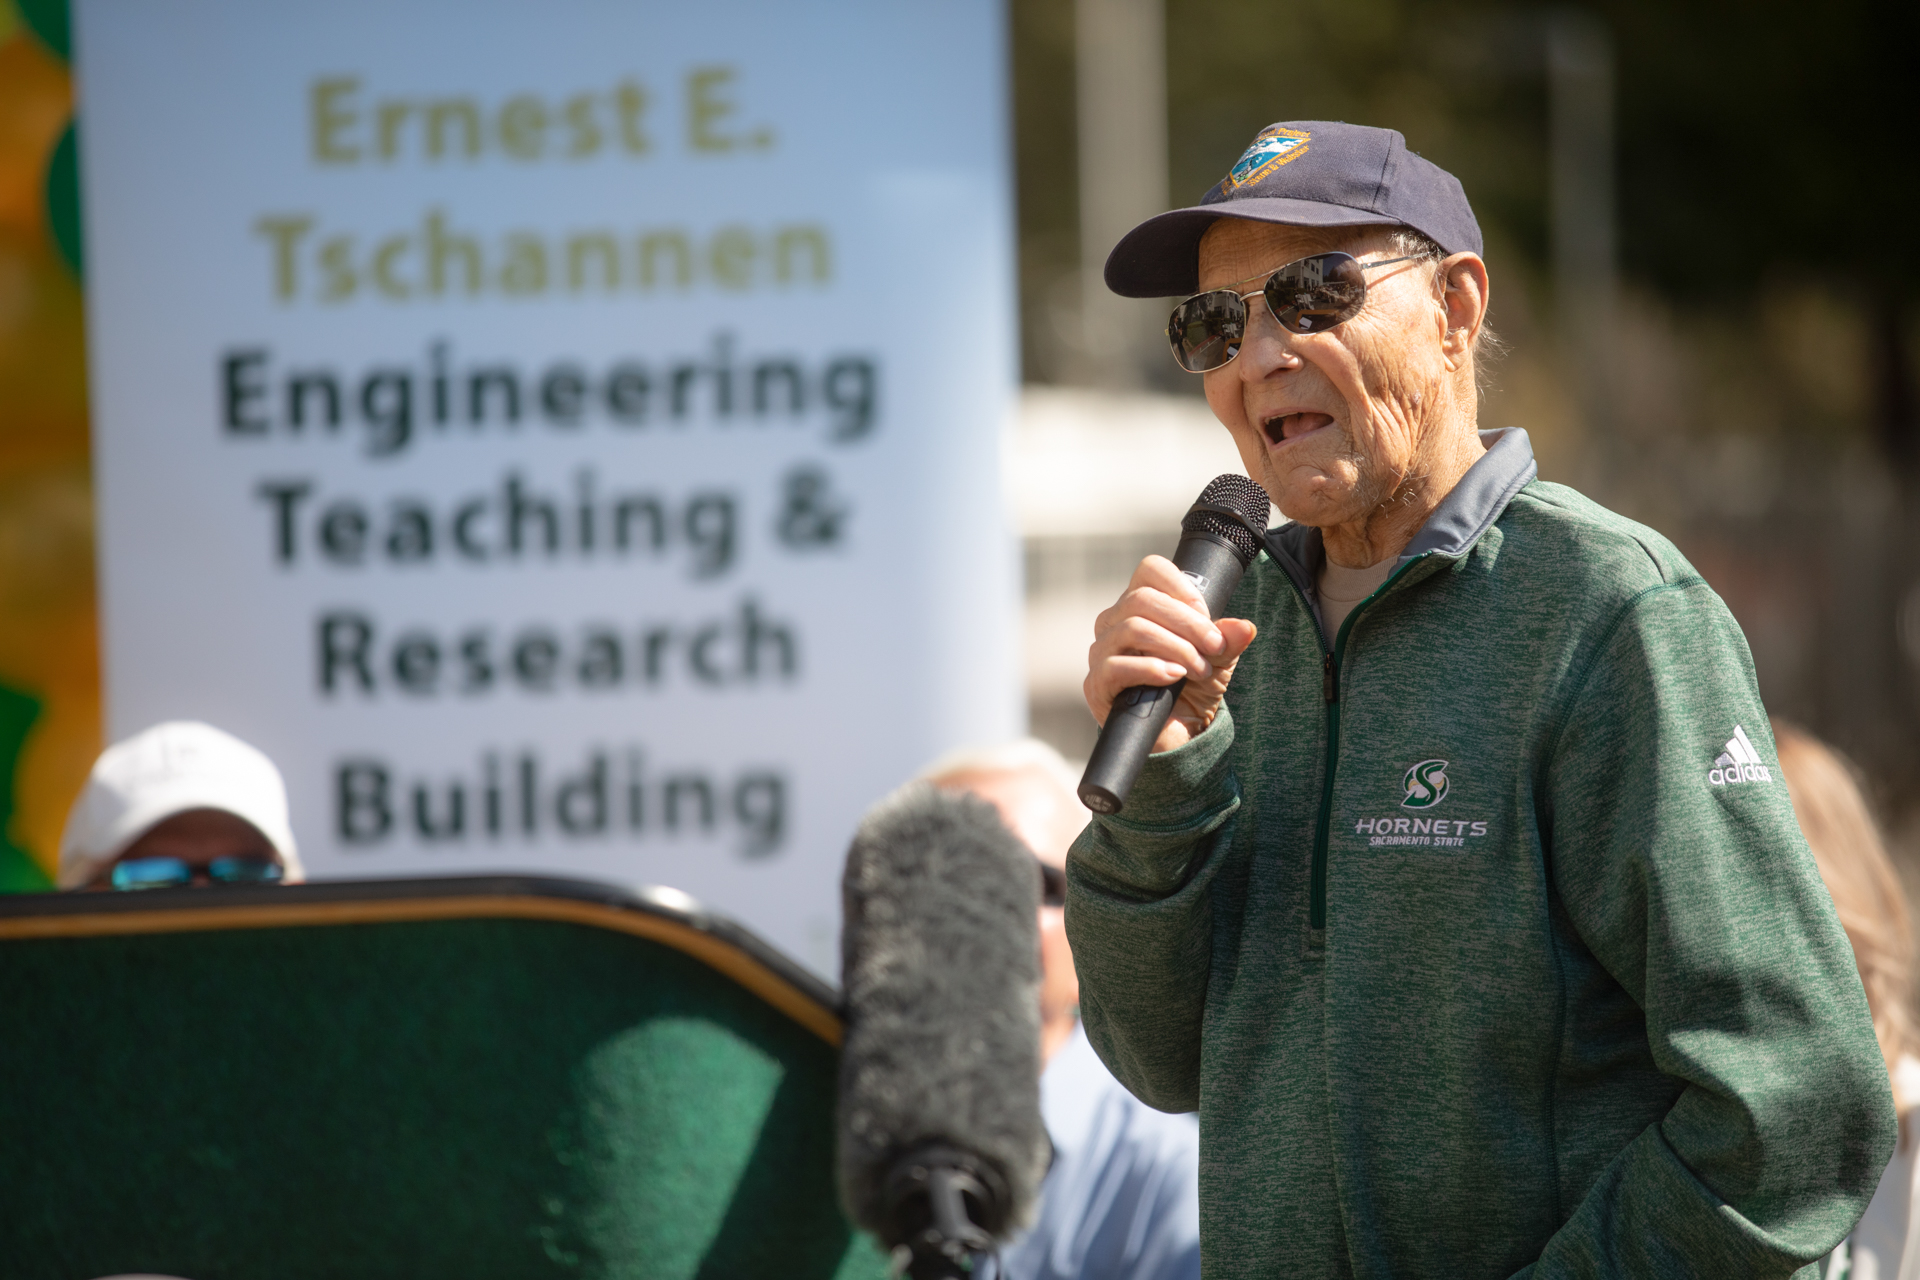 Ernest E. Tschannen speaking at the unveiling of the engineering plan